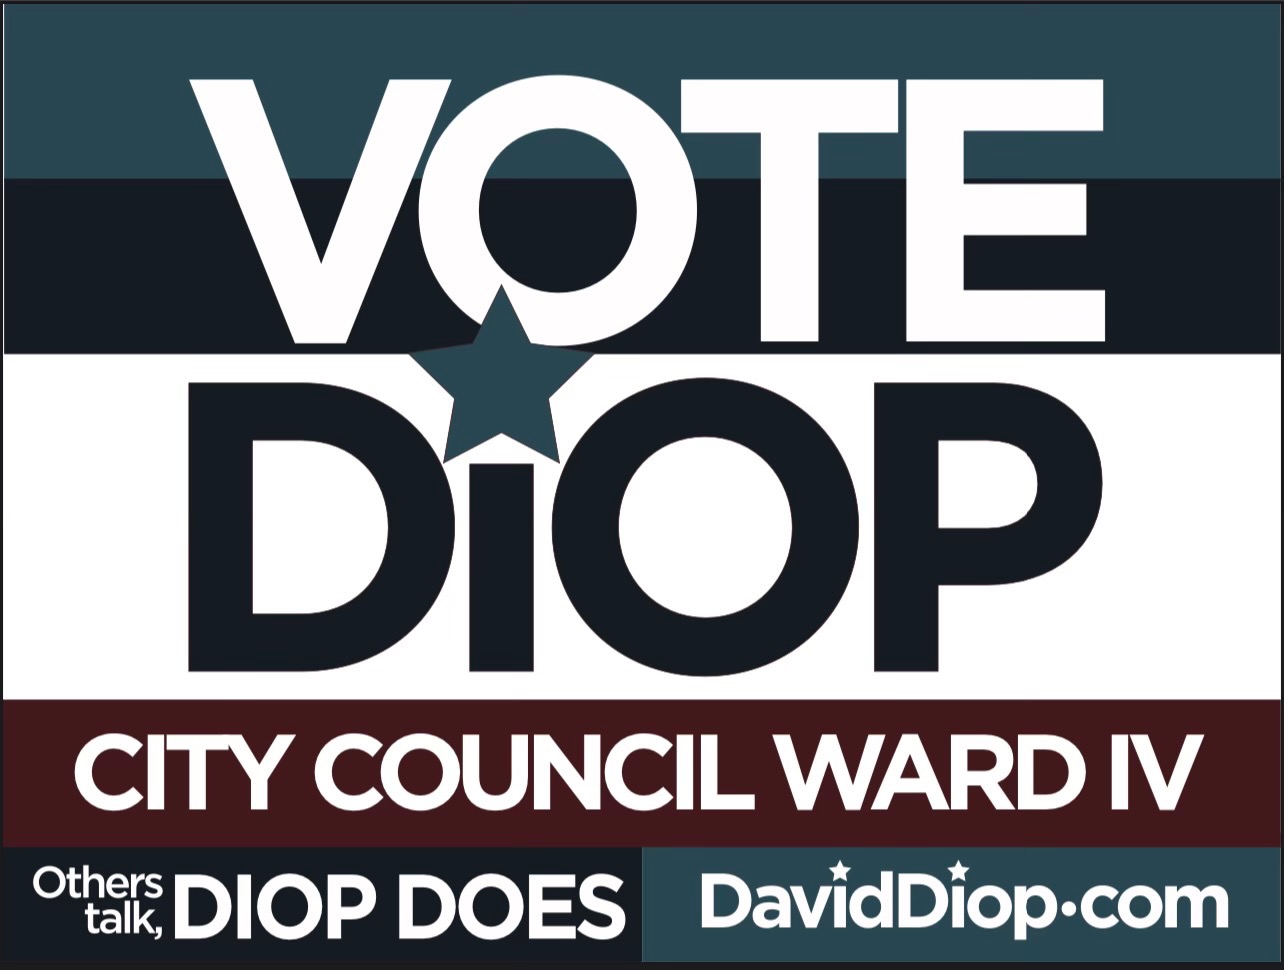 The Committee to Elect David Diop logo